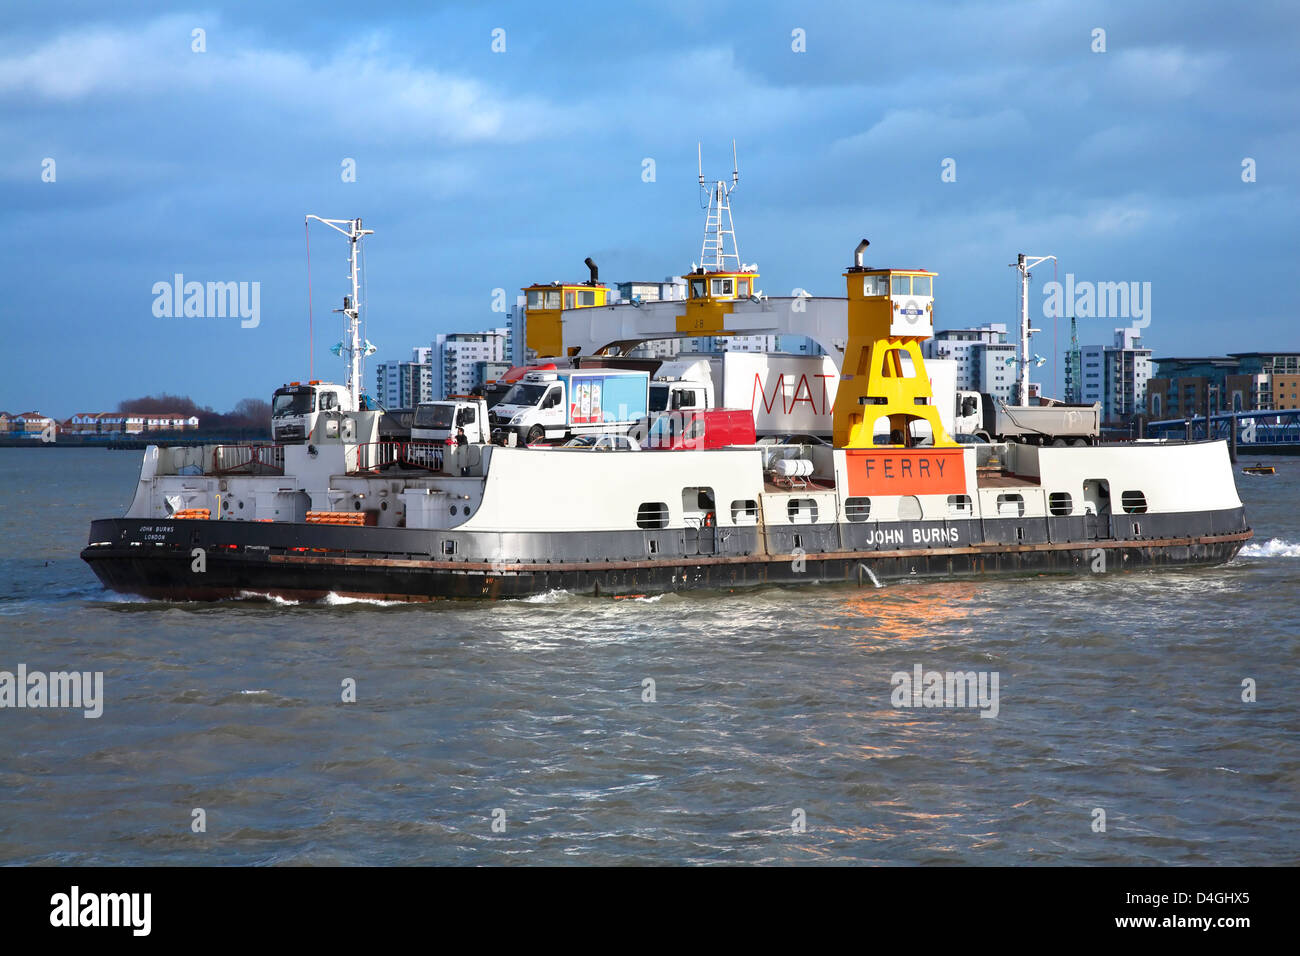 Woolwich Ferry, John Burns, traverse la Tamise entre Woolwich et North Woolwich. Banque D'Images